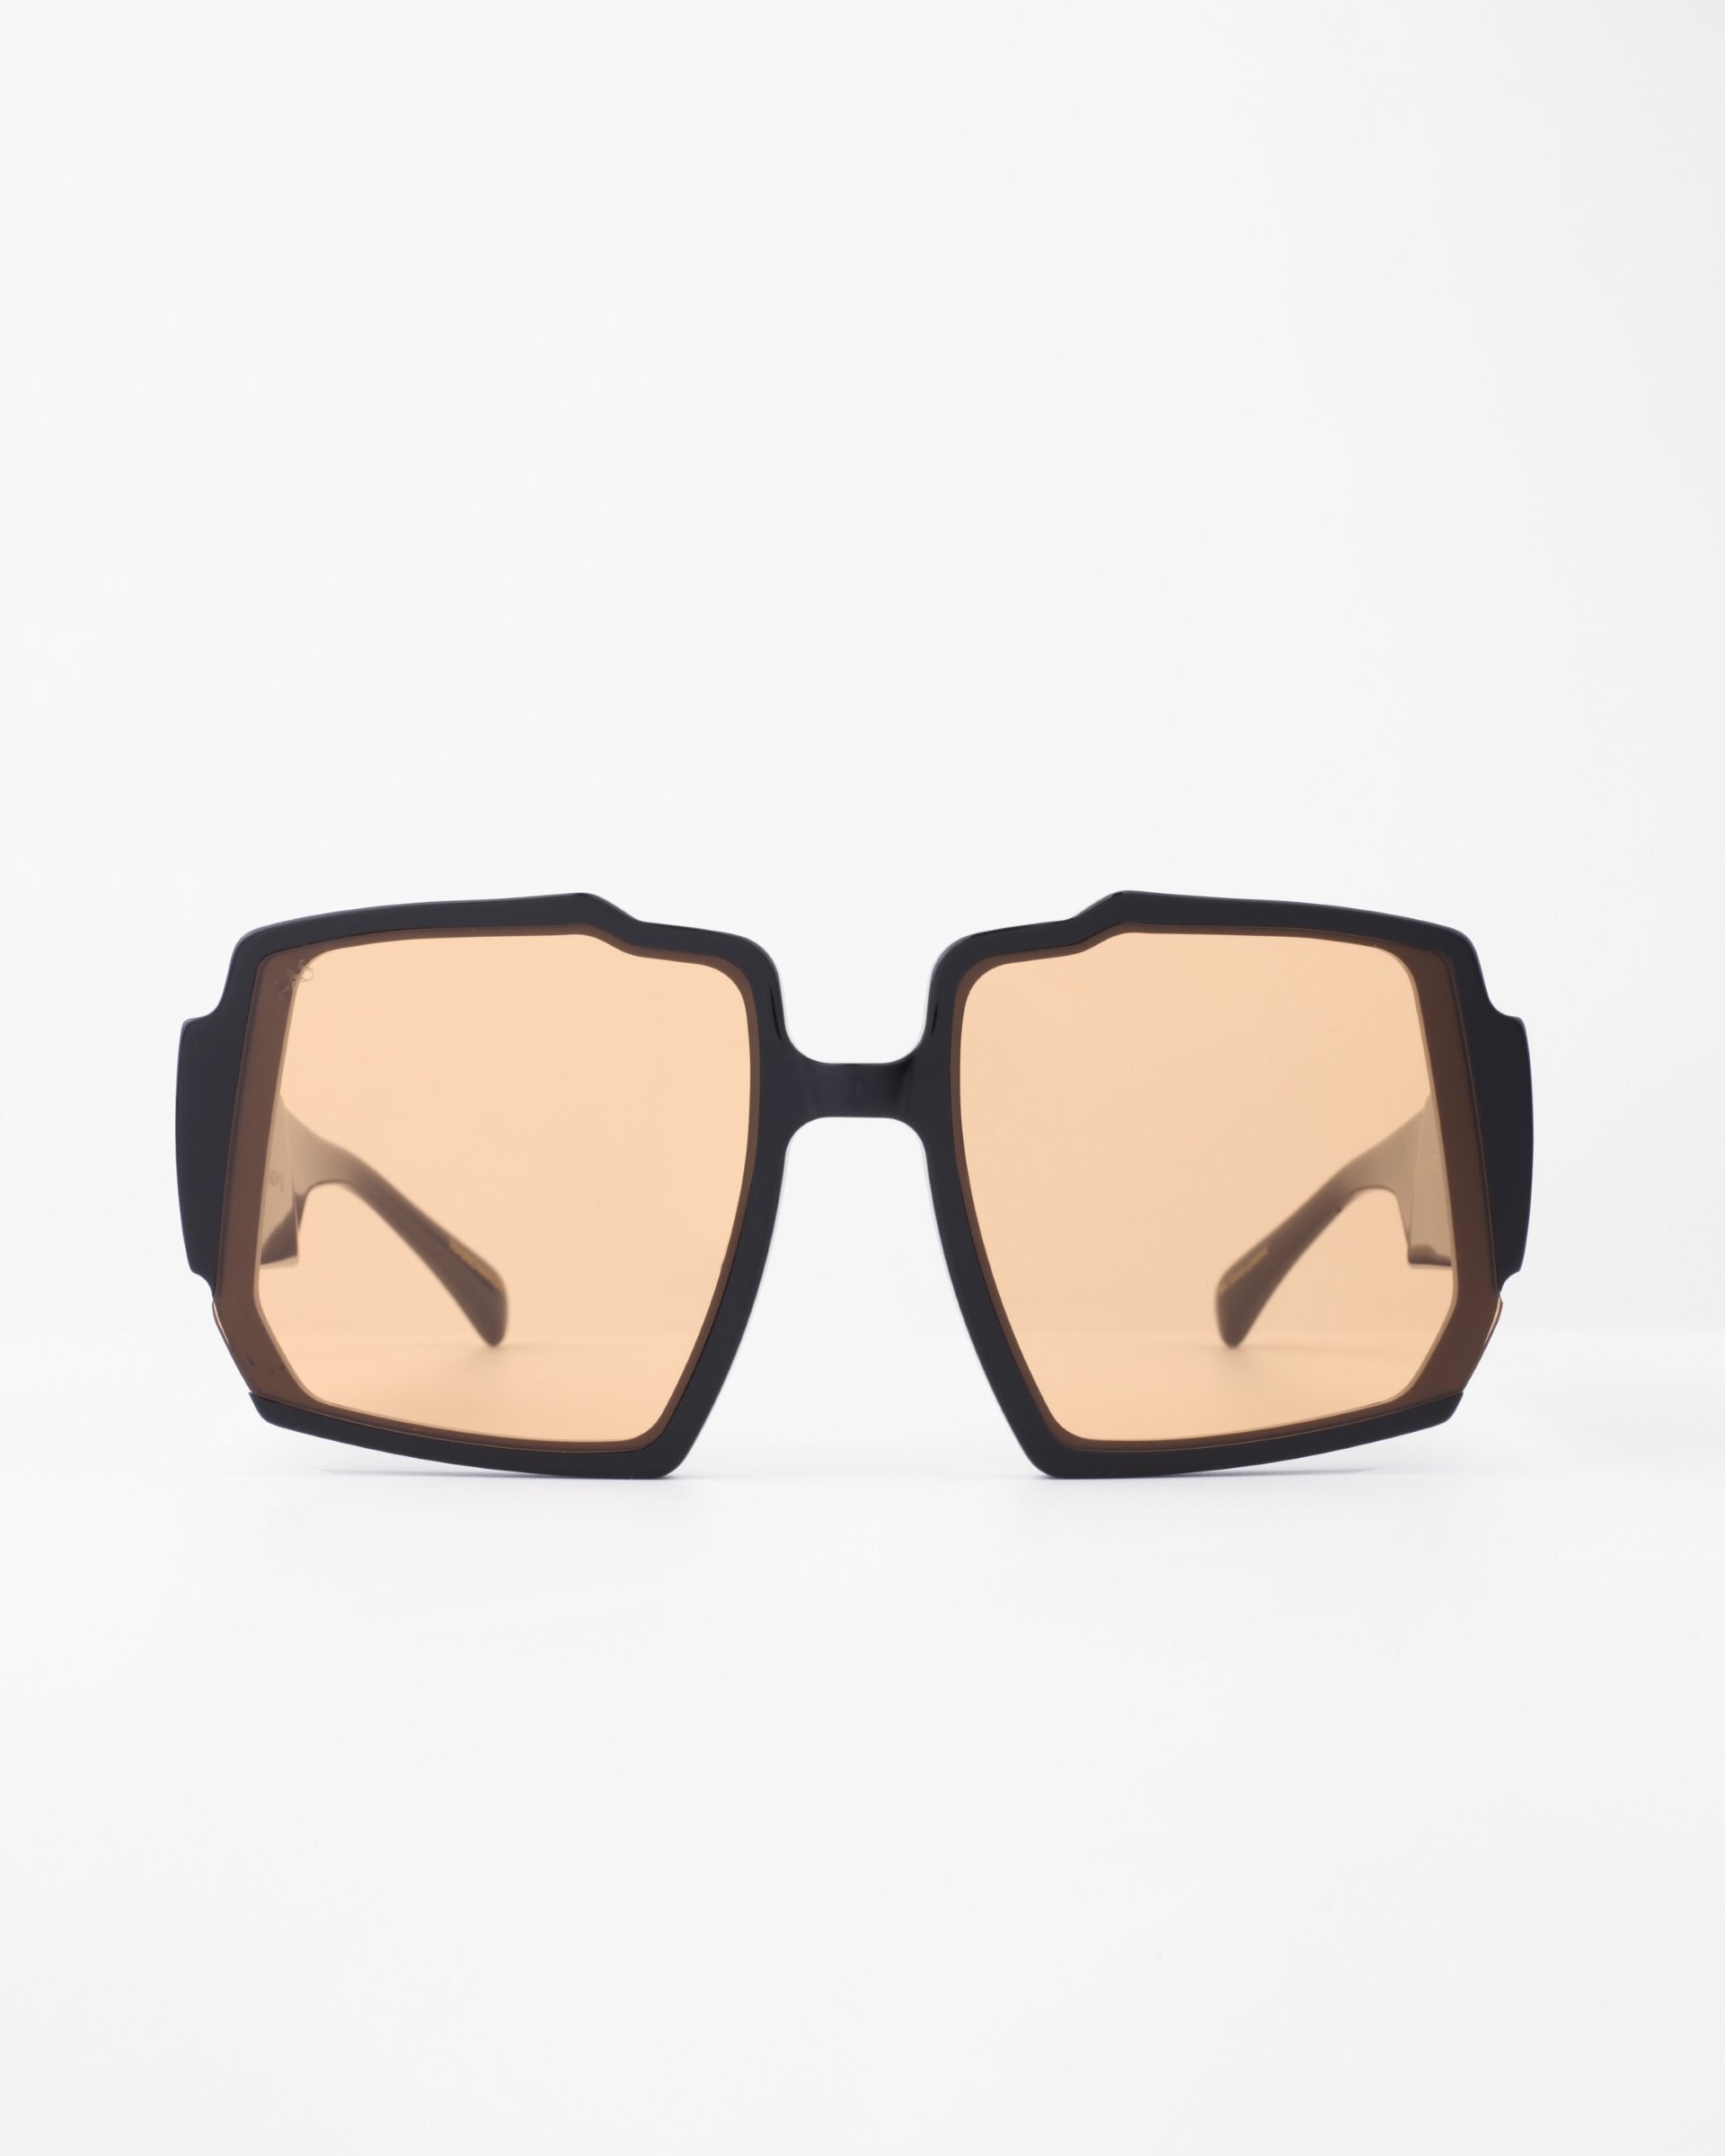 A pair of stylish black square-framed Moritz by For Art's Sake® with light brown tinted, UV-protected lenses. Featuring a chunky acetate frame and subtle gold-plated inlay, the Moritz sunglasses are displayed against a plain white background, giving a clear view of their modern and sleek design.